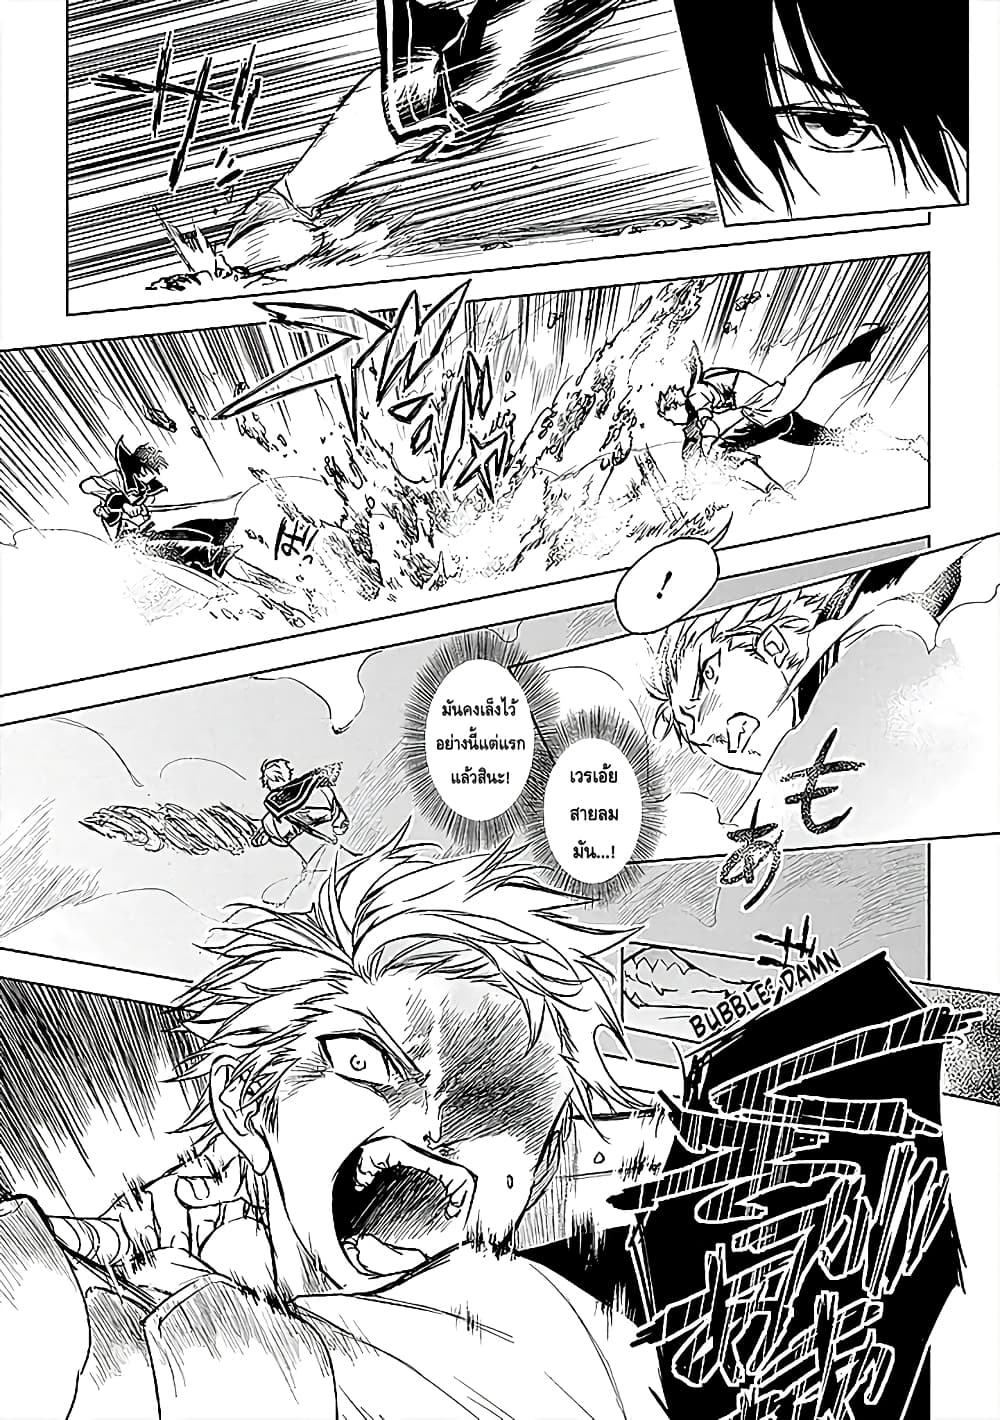 Ori of the Dragon Chain Heart in the Mind 11 (14)